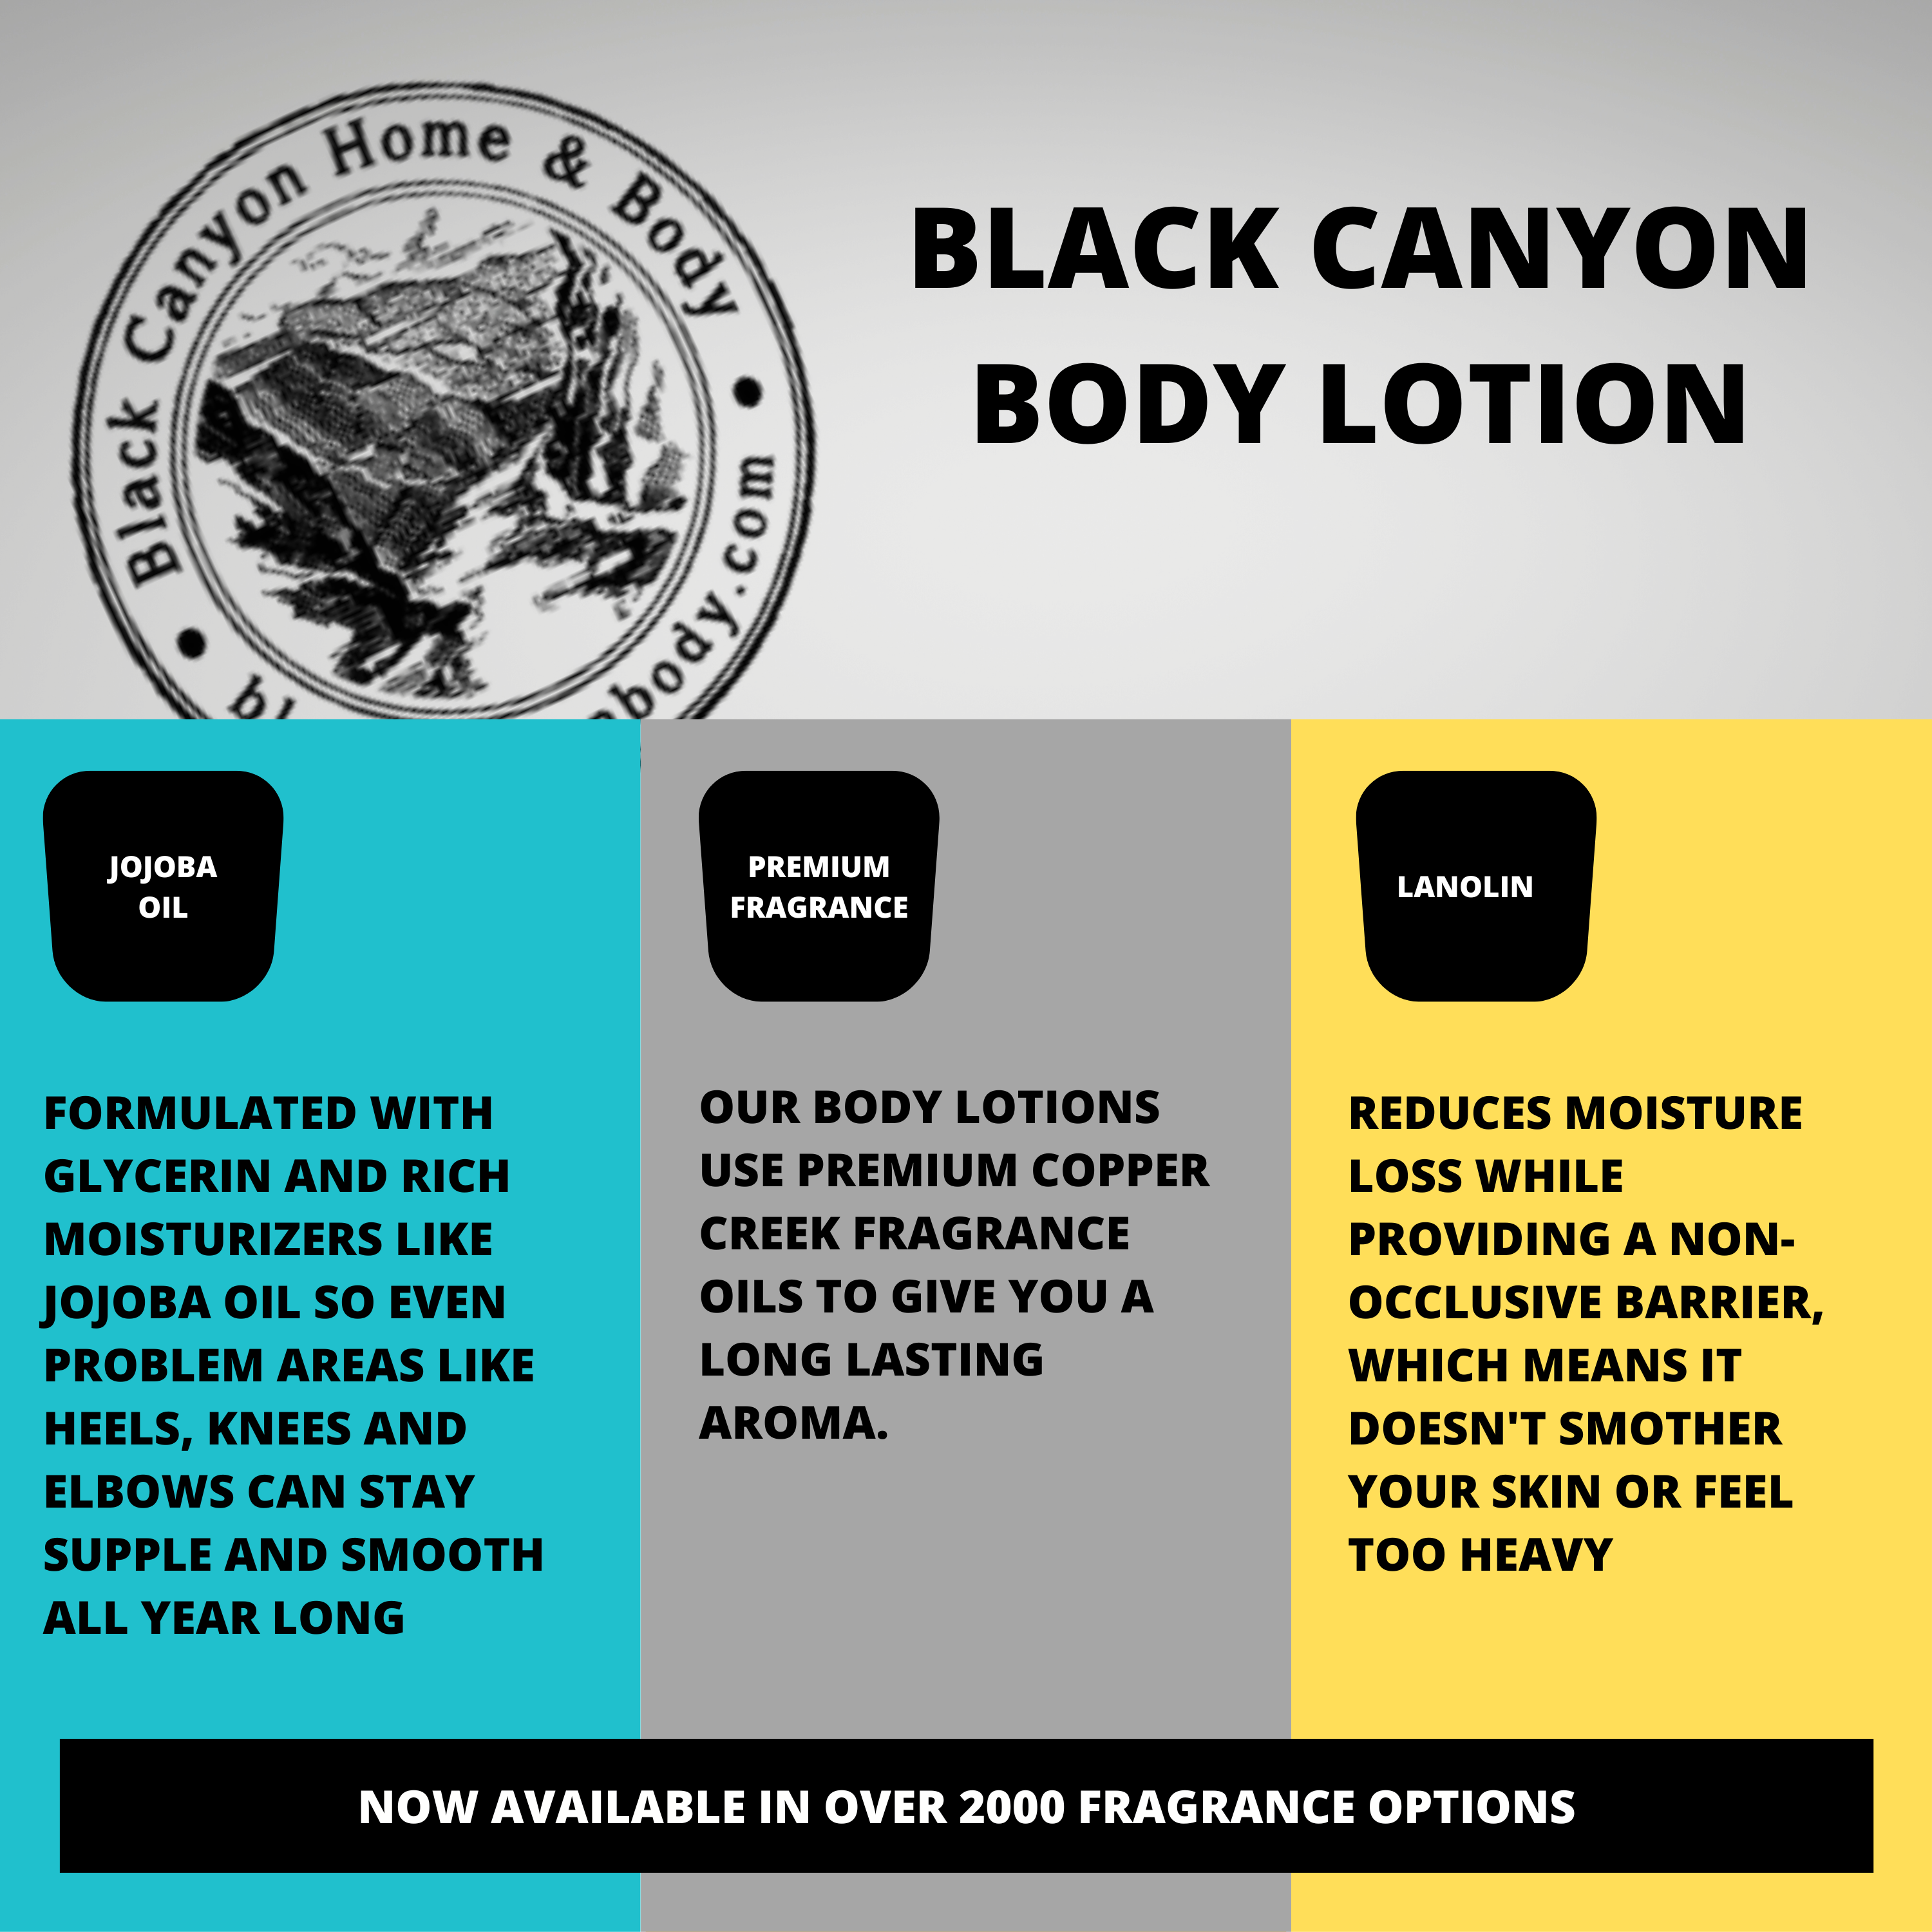 Black Canyon Wild Blueberry Vanilla Scented Luxury Body Lotion with Lanolin and Jojoba Oil